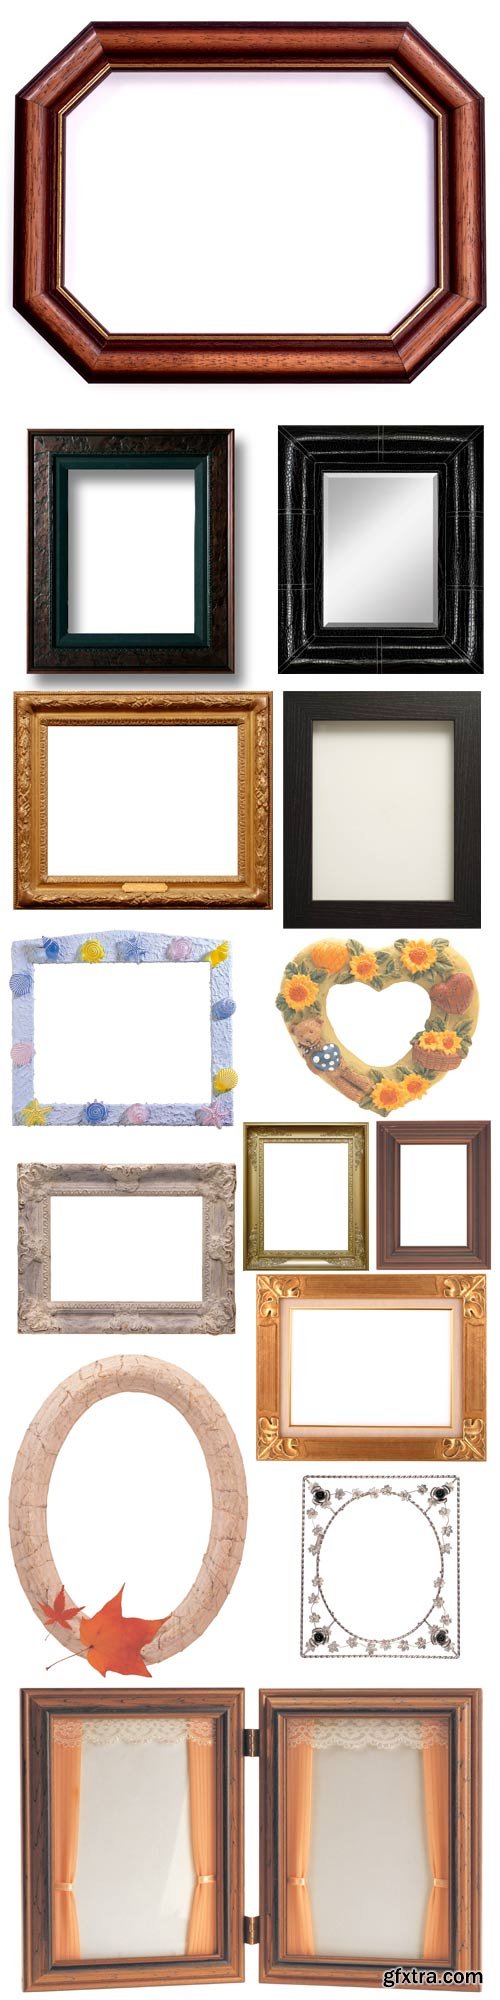 Picture Frames stock photos